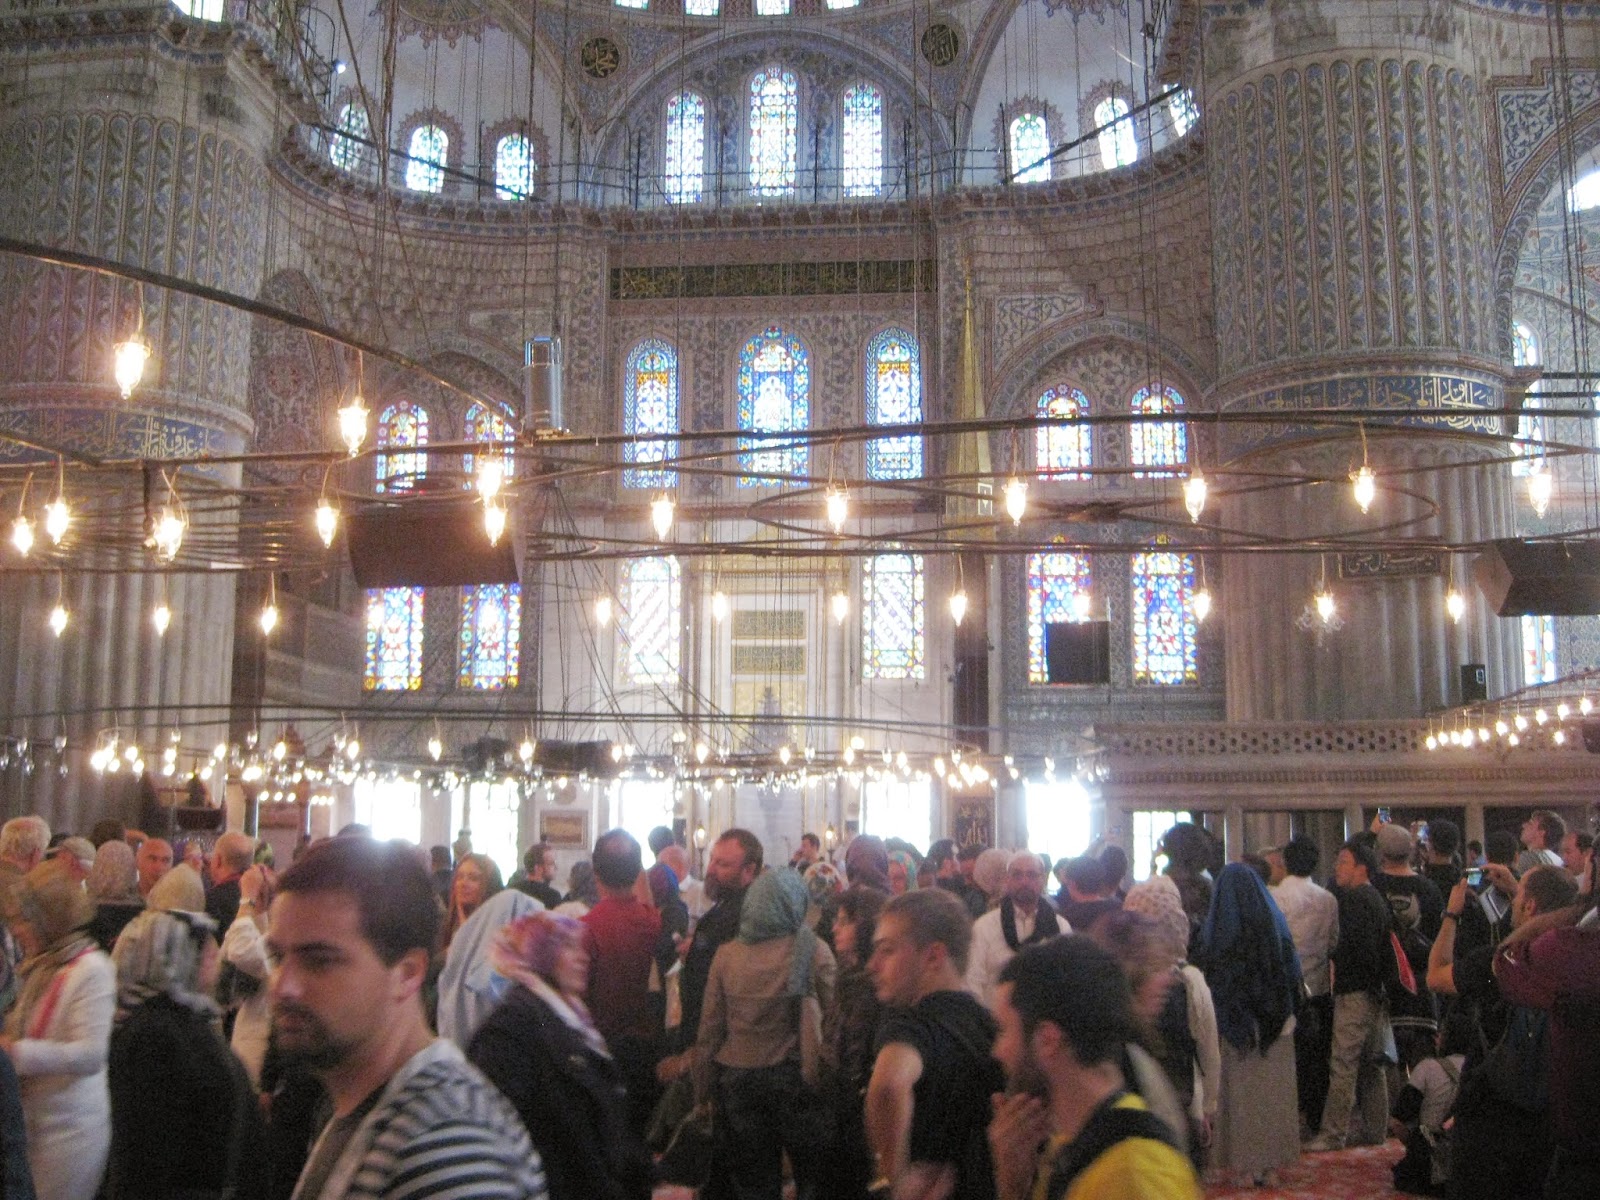 Istanbul - There's certainly a crowd of visitors